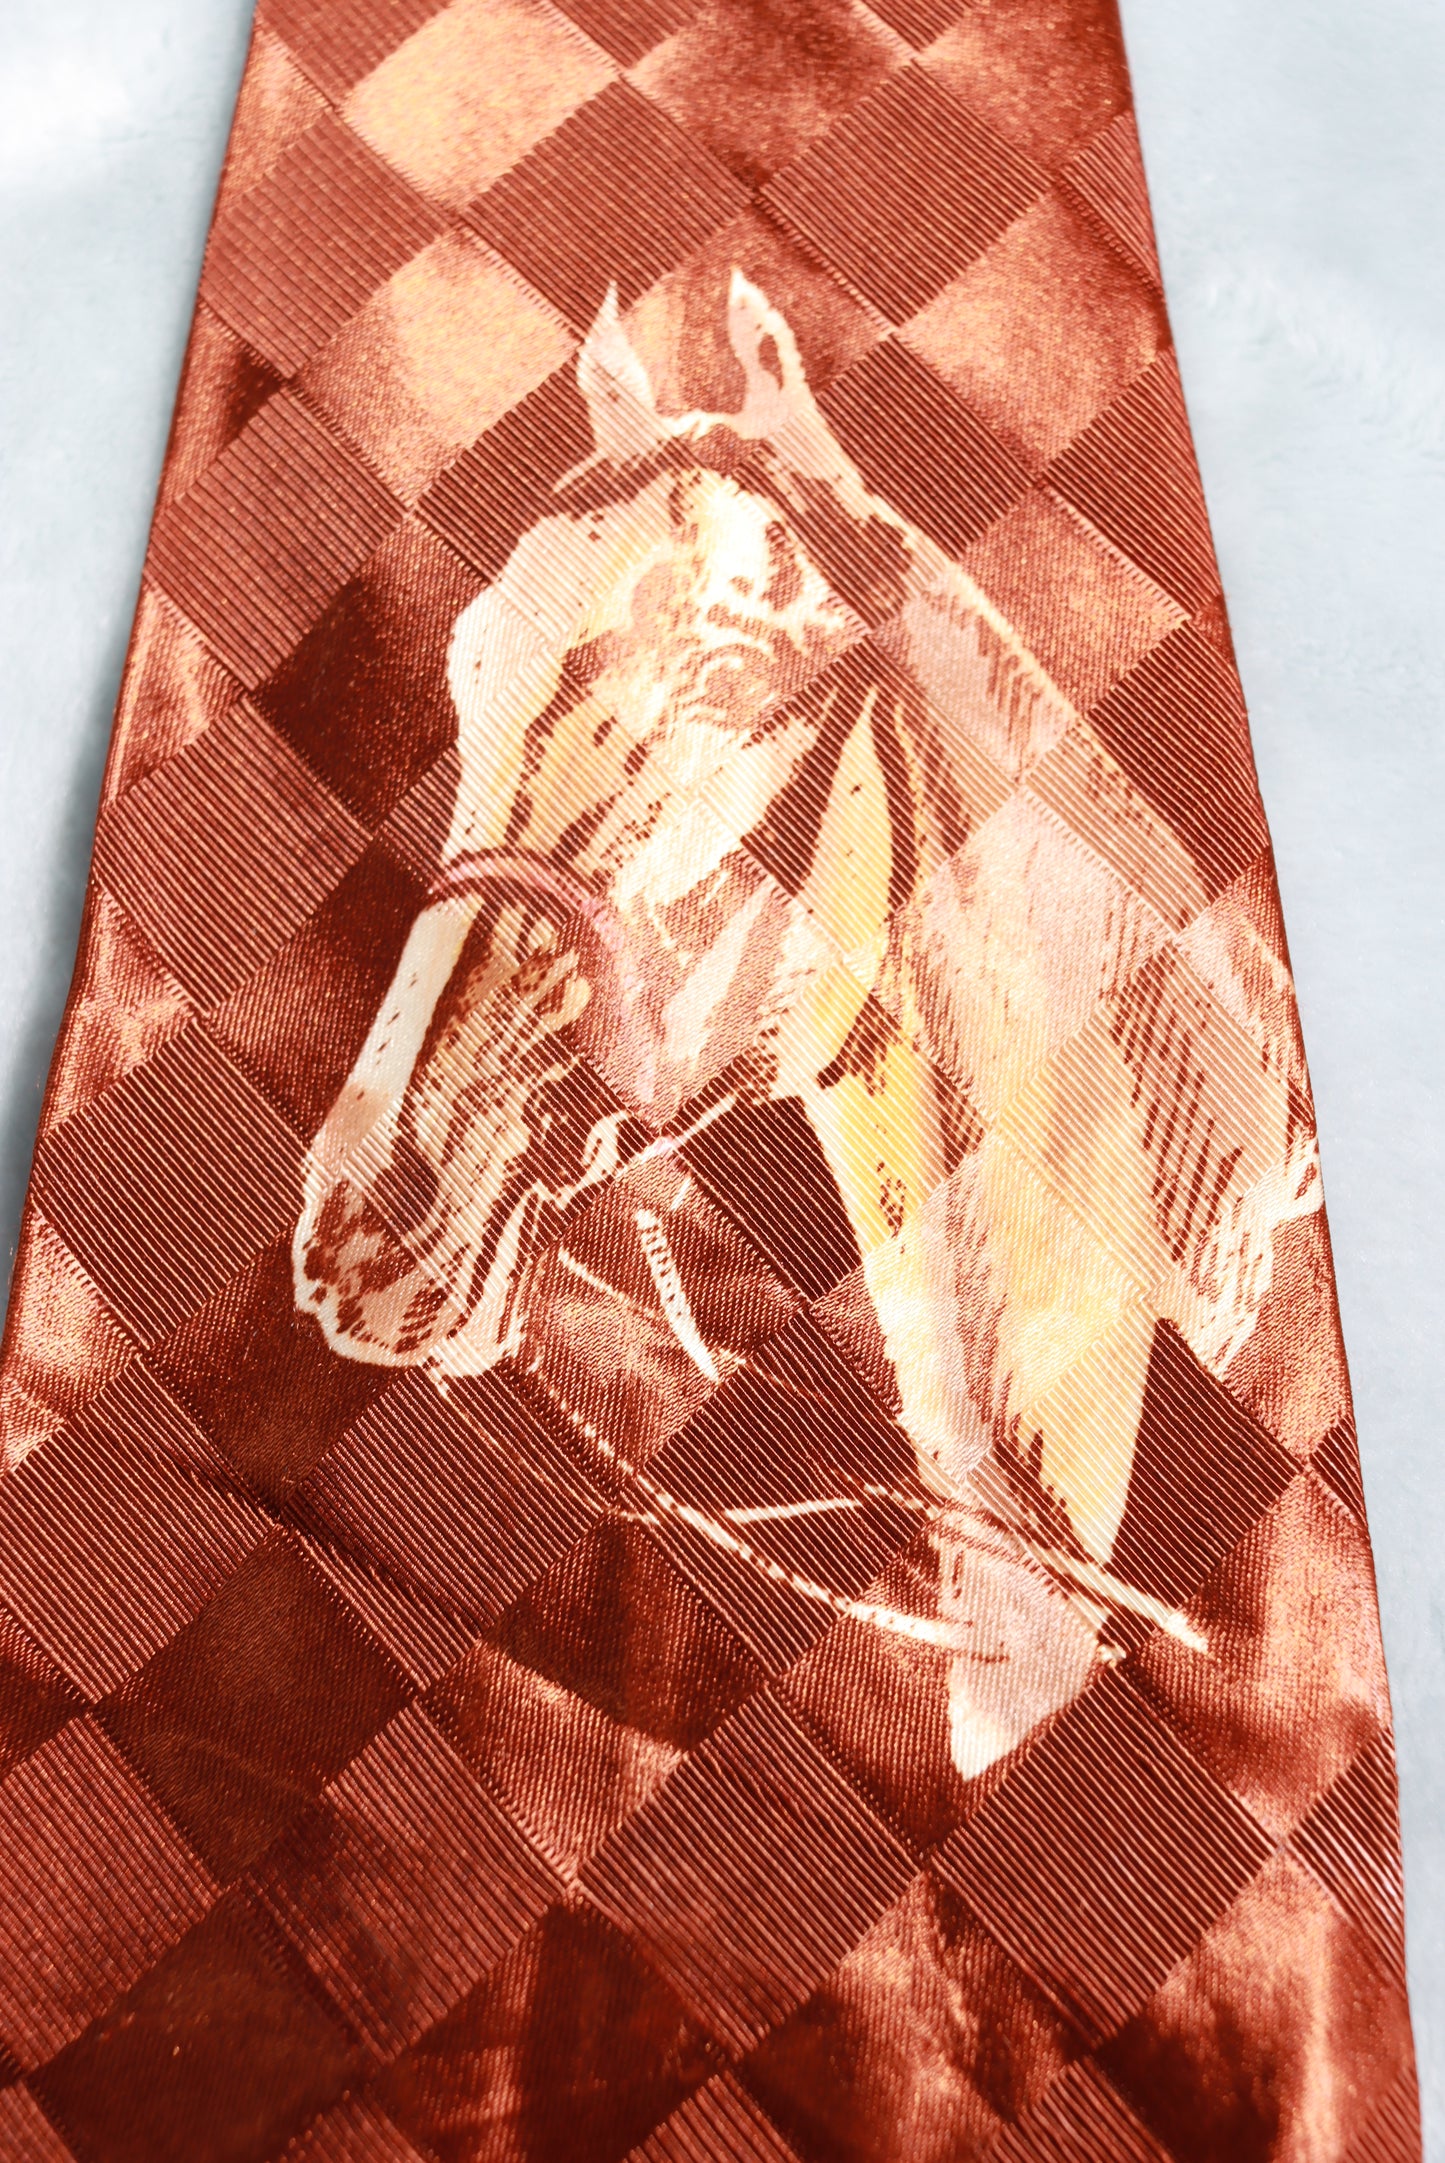 Vintage Hand Painted Horse Head Jacquard Swing Tie 1940s/50s